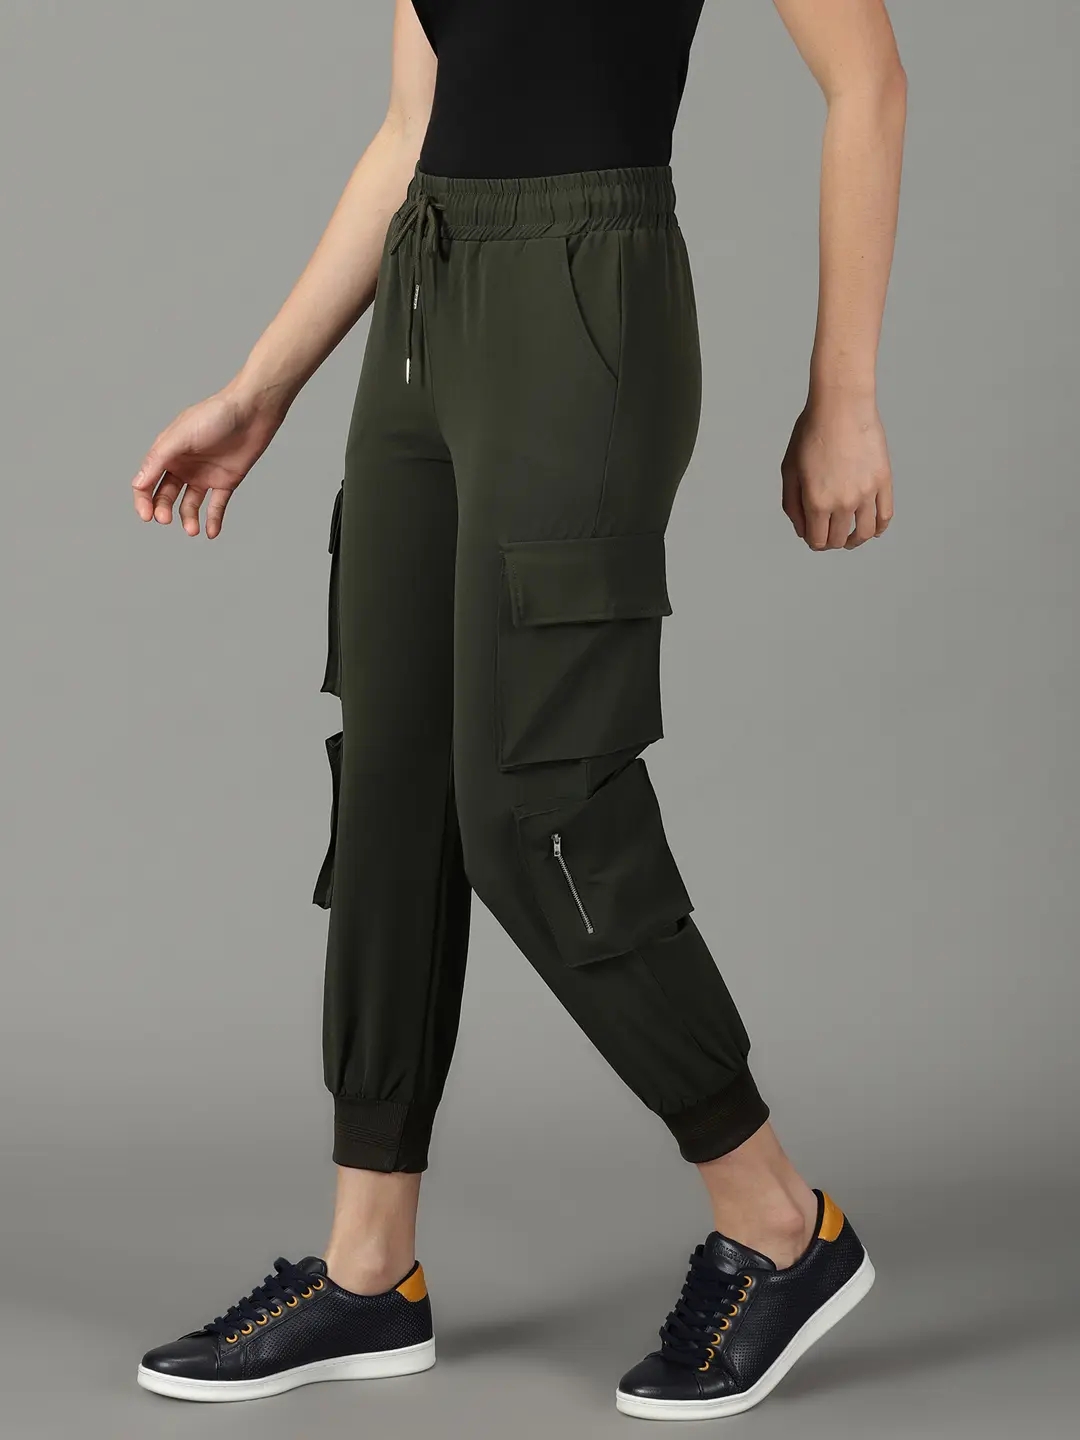 Women Solid Cotton Olive Green Cuffed Joggers